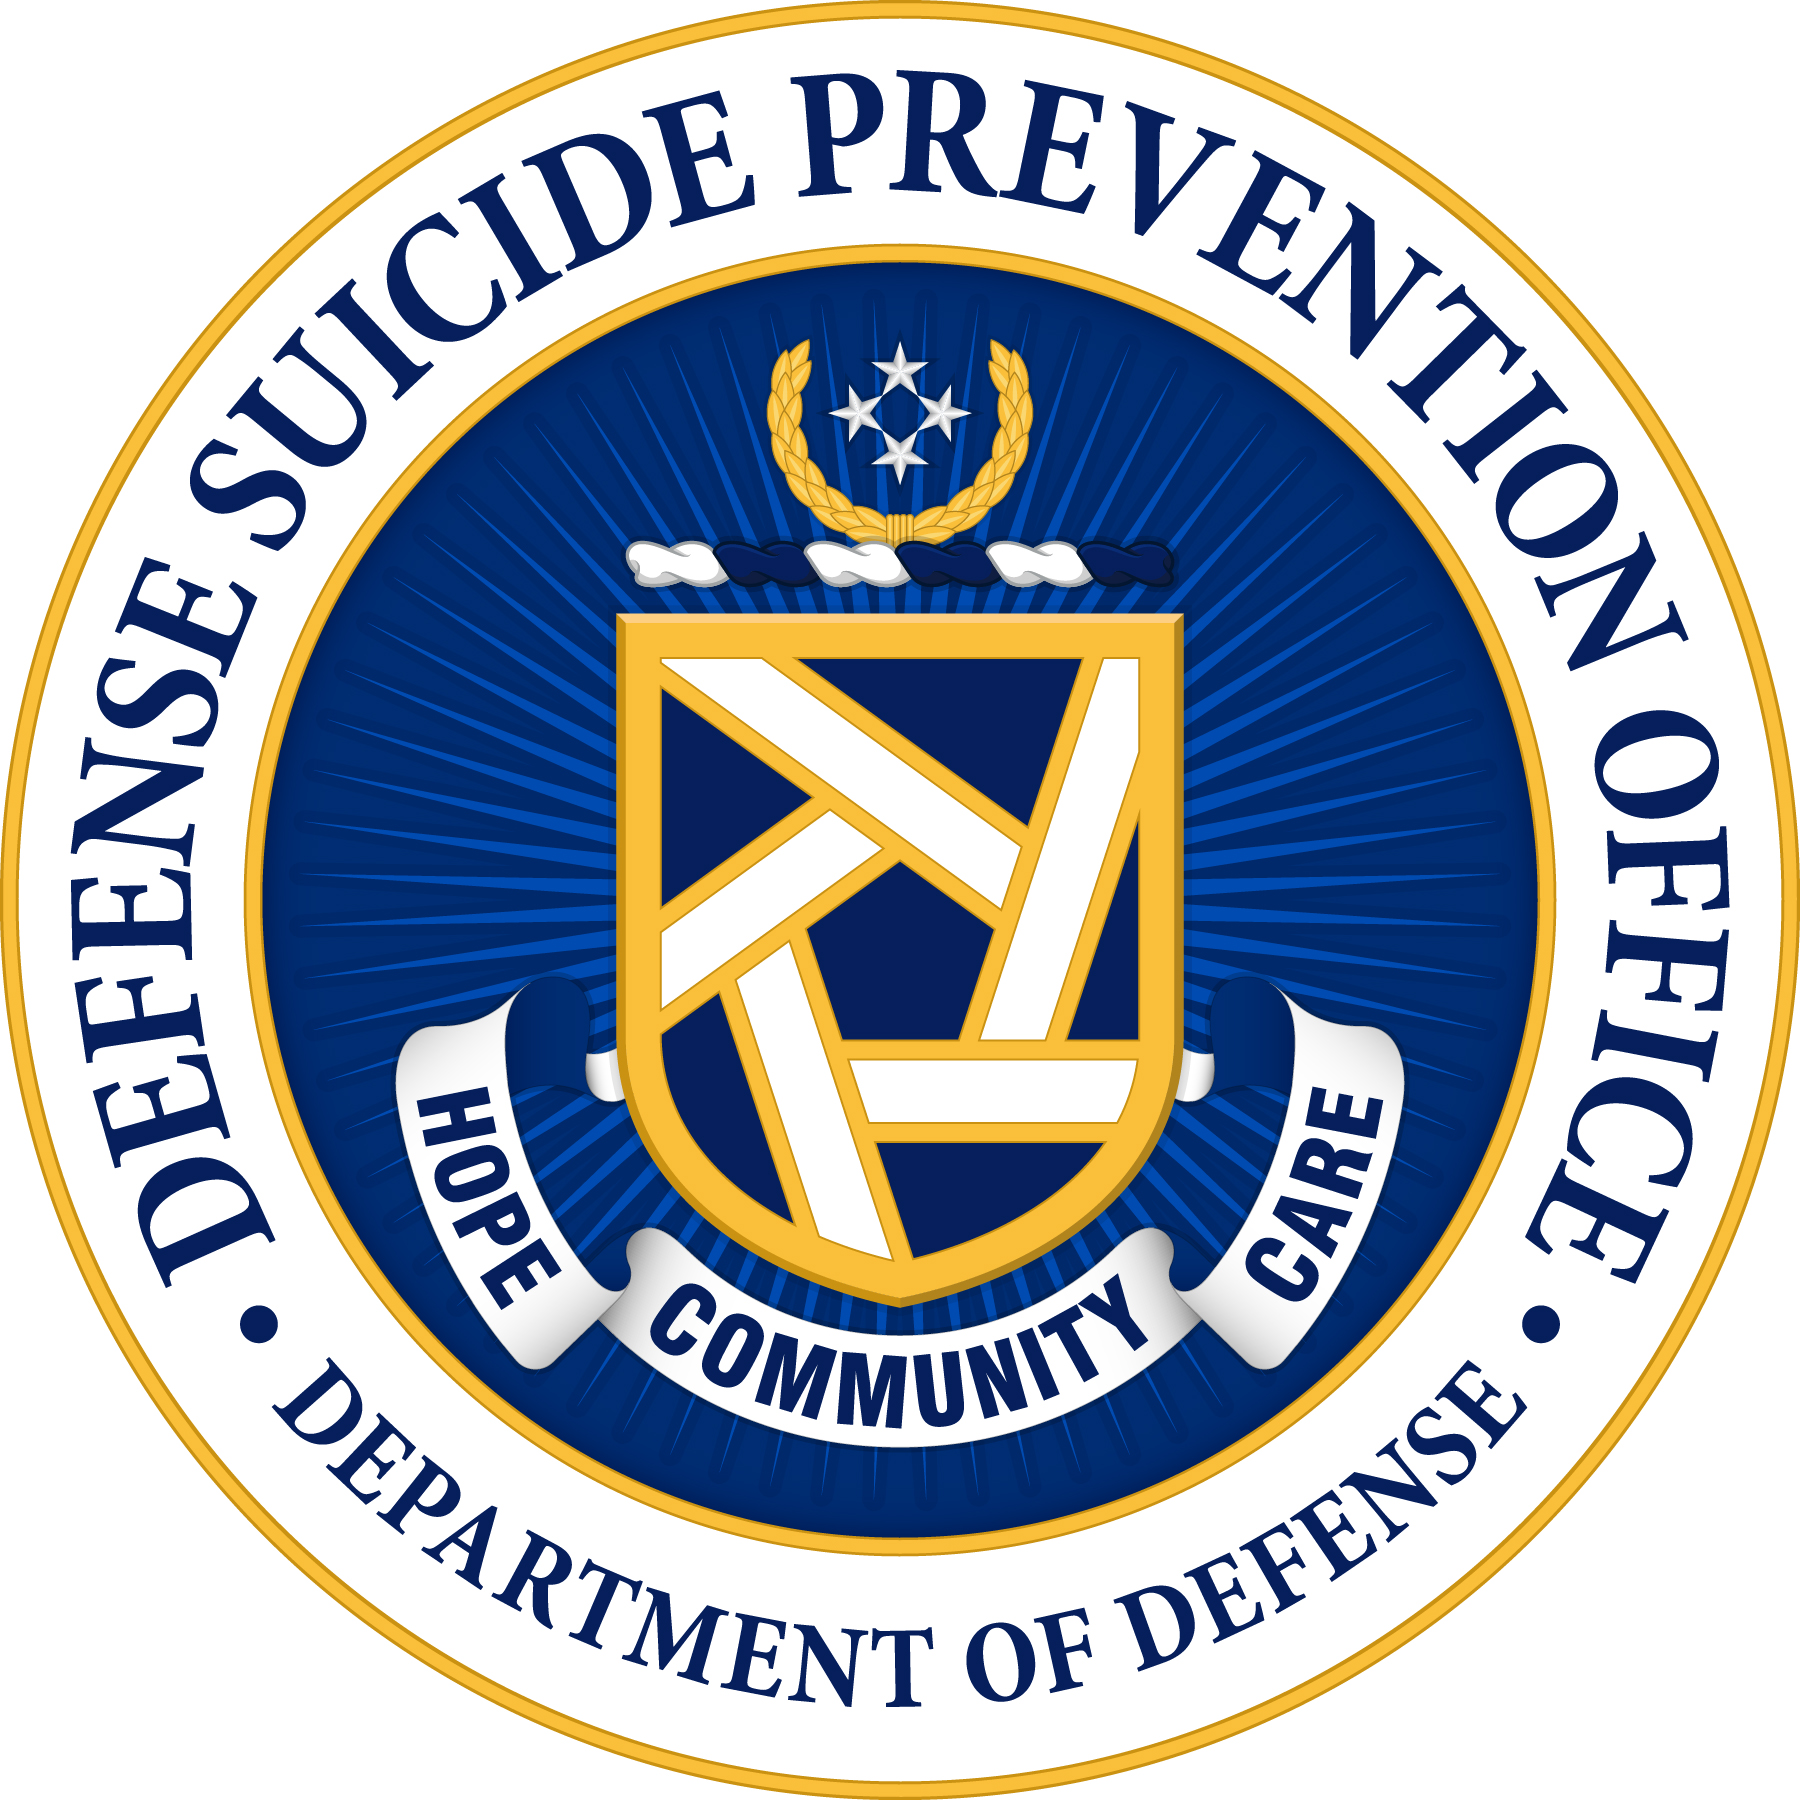 Dod Promotes Suicide Prevention Through Work With Media Other Groups U S Department Of